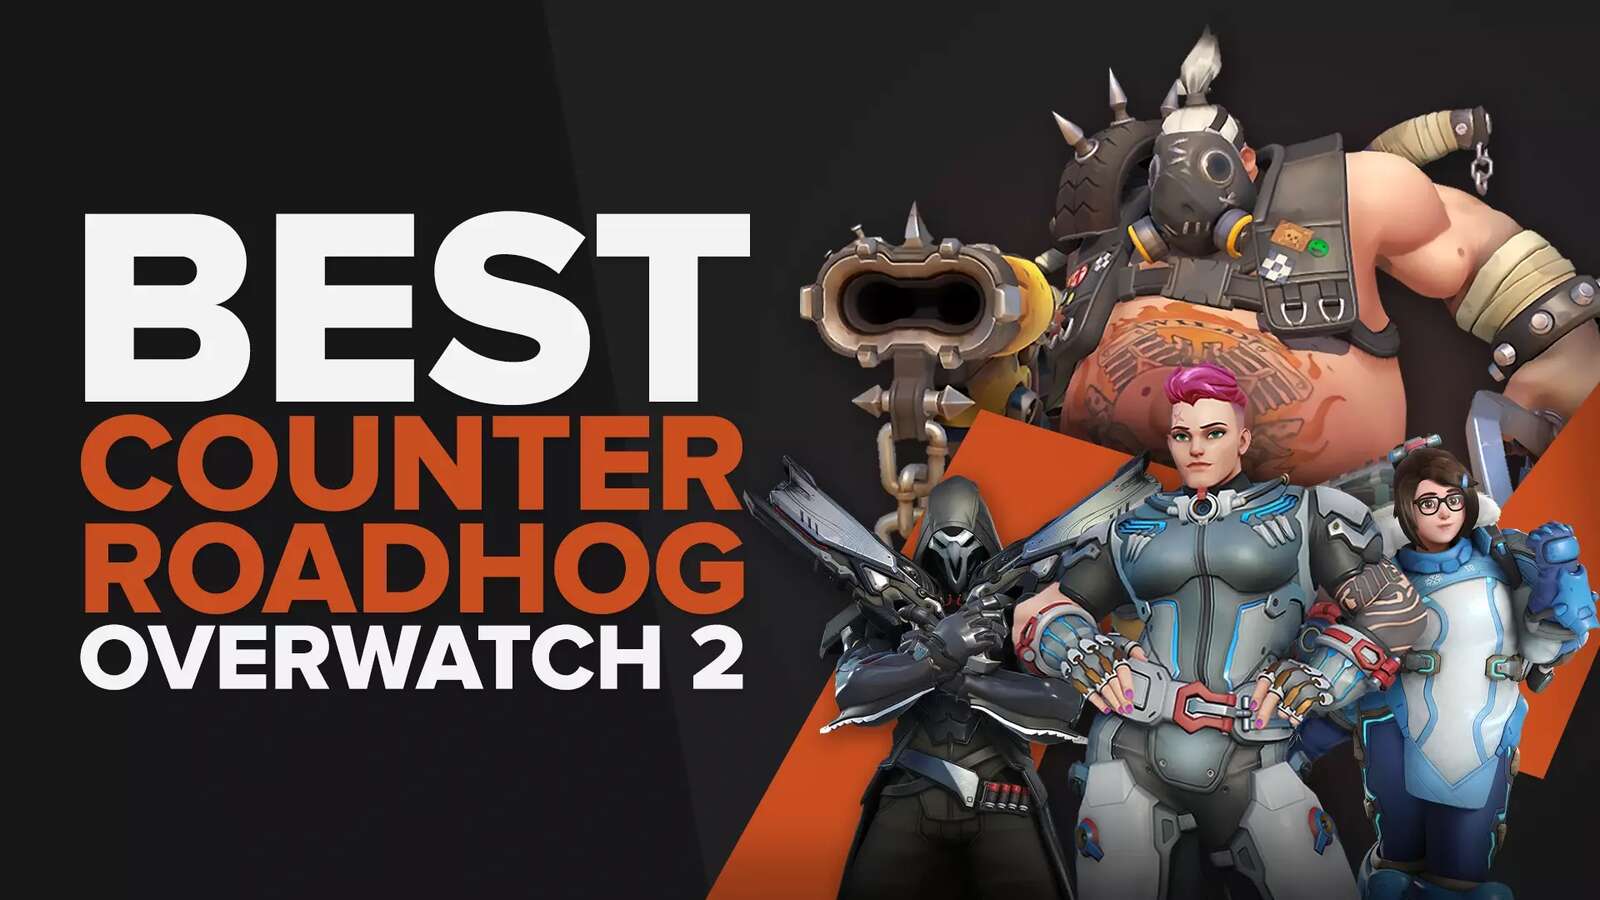 The 6 Absolute Best Counters for Roadhog in Overwatch 2